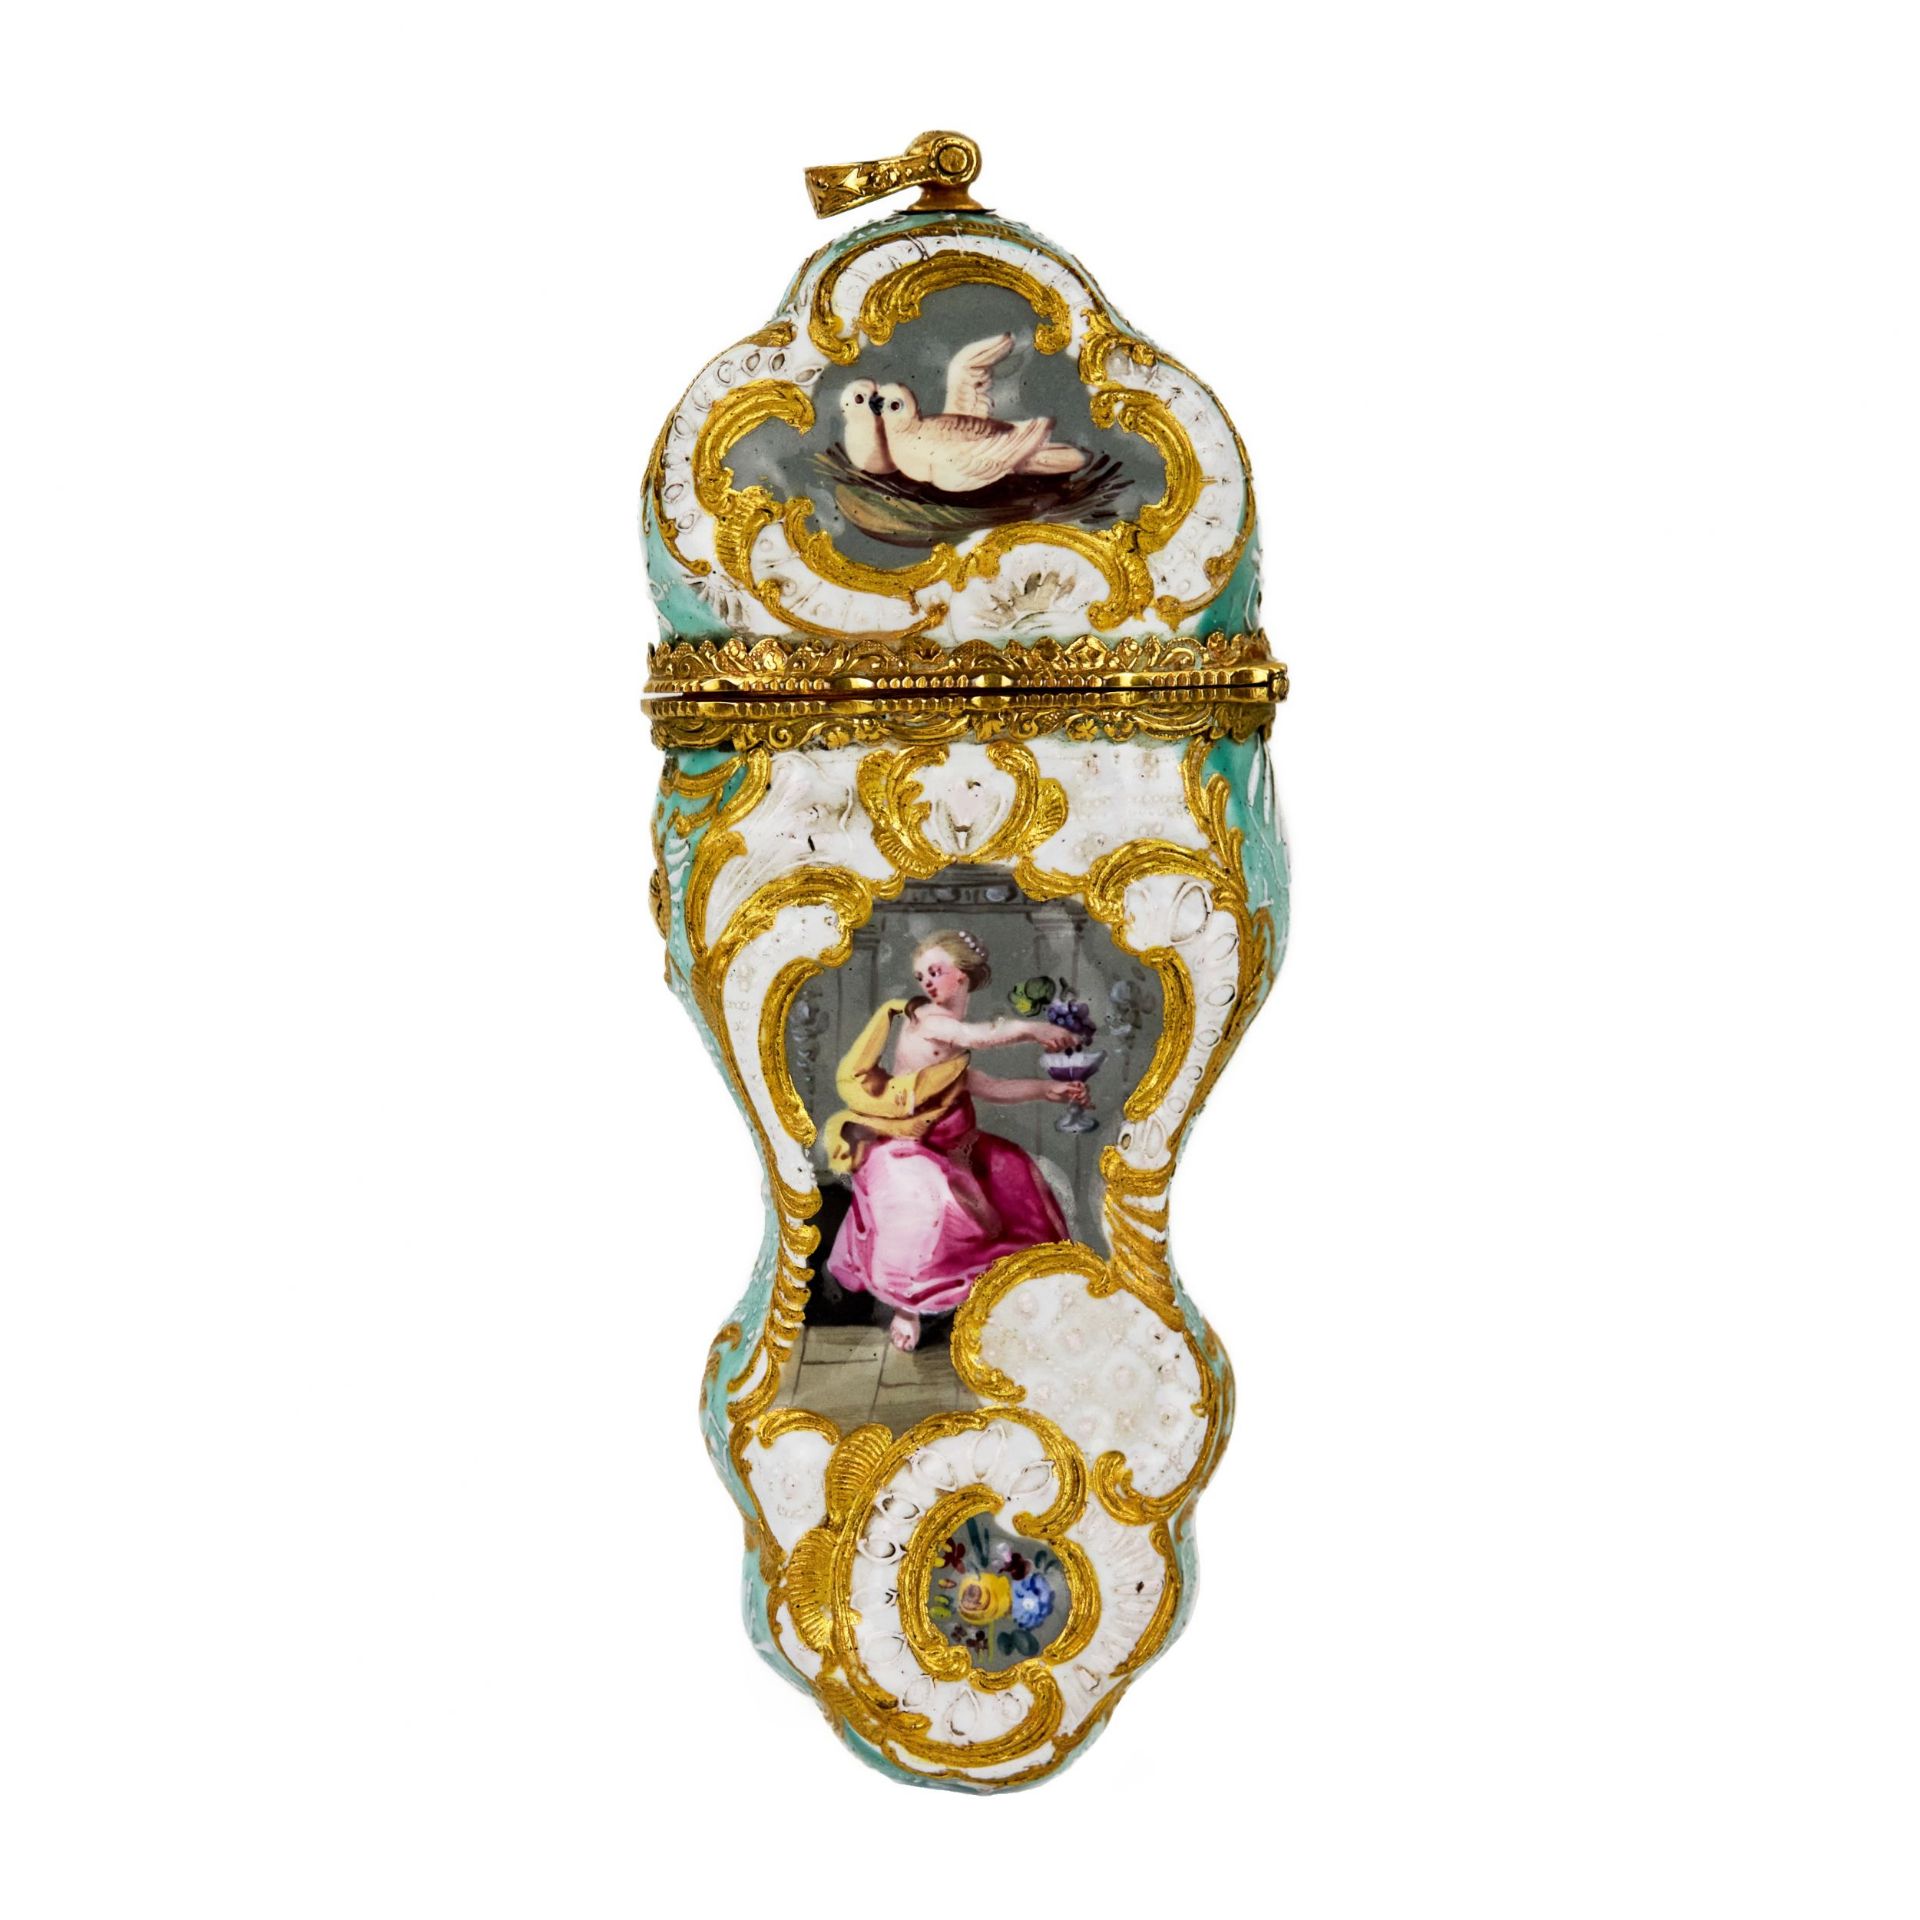 English painted porcelain necessaire with gold. 18 century. - Image 5 of 10